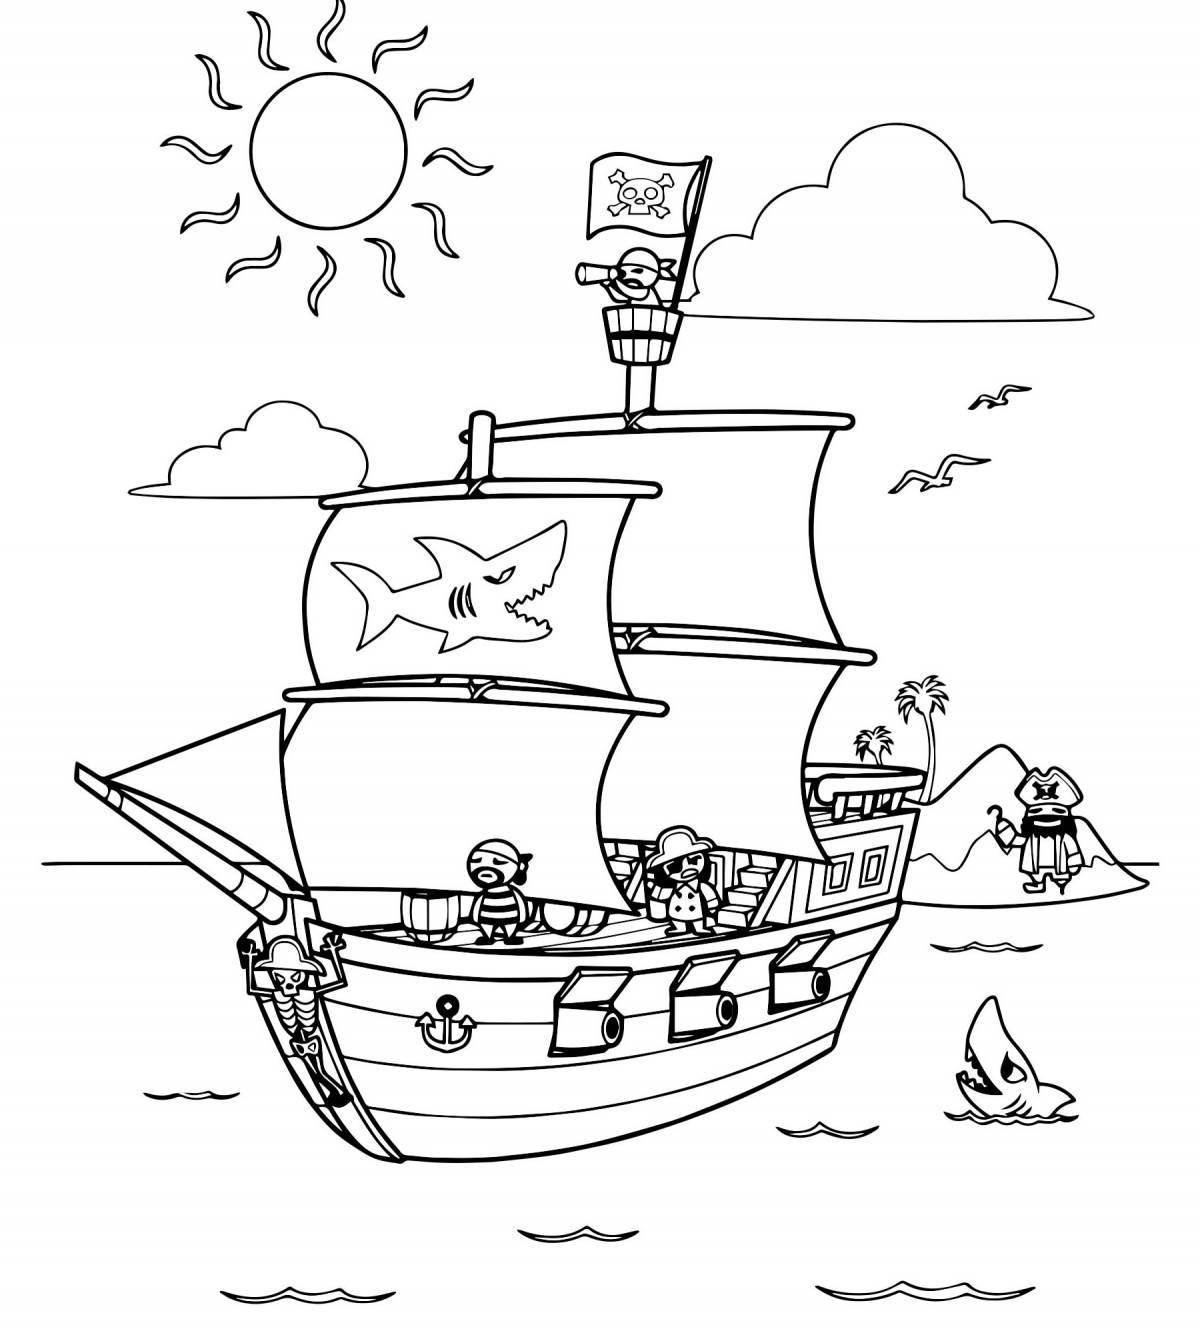 Adorable ship coloring book for 7 year olds